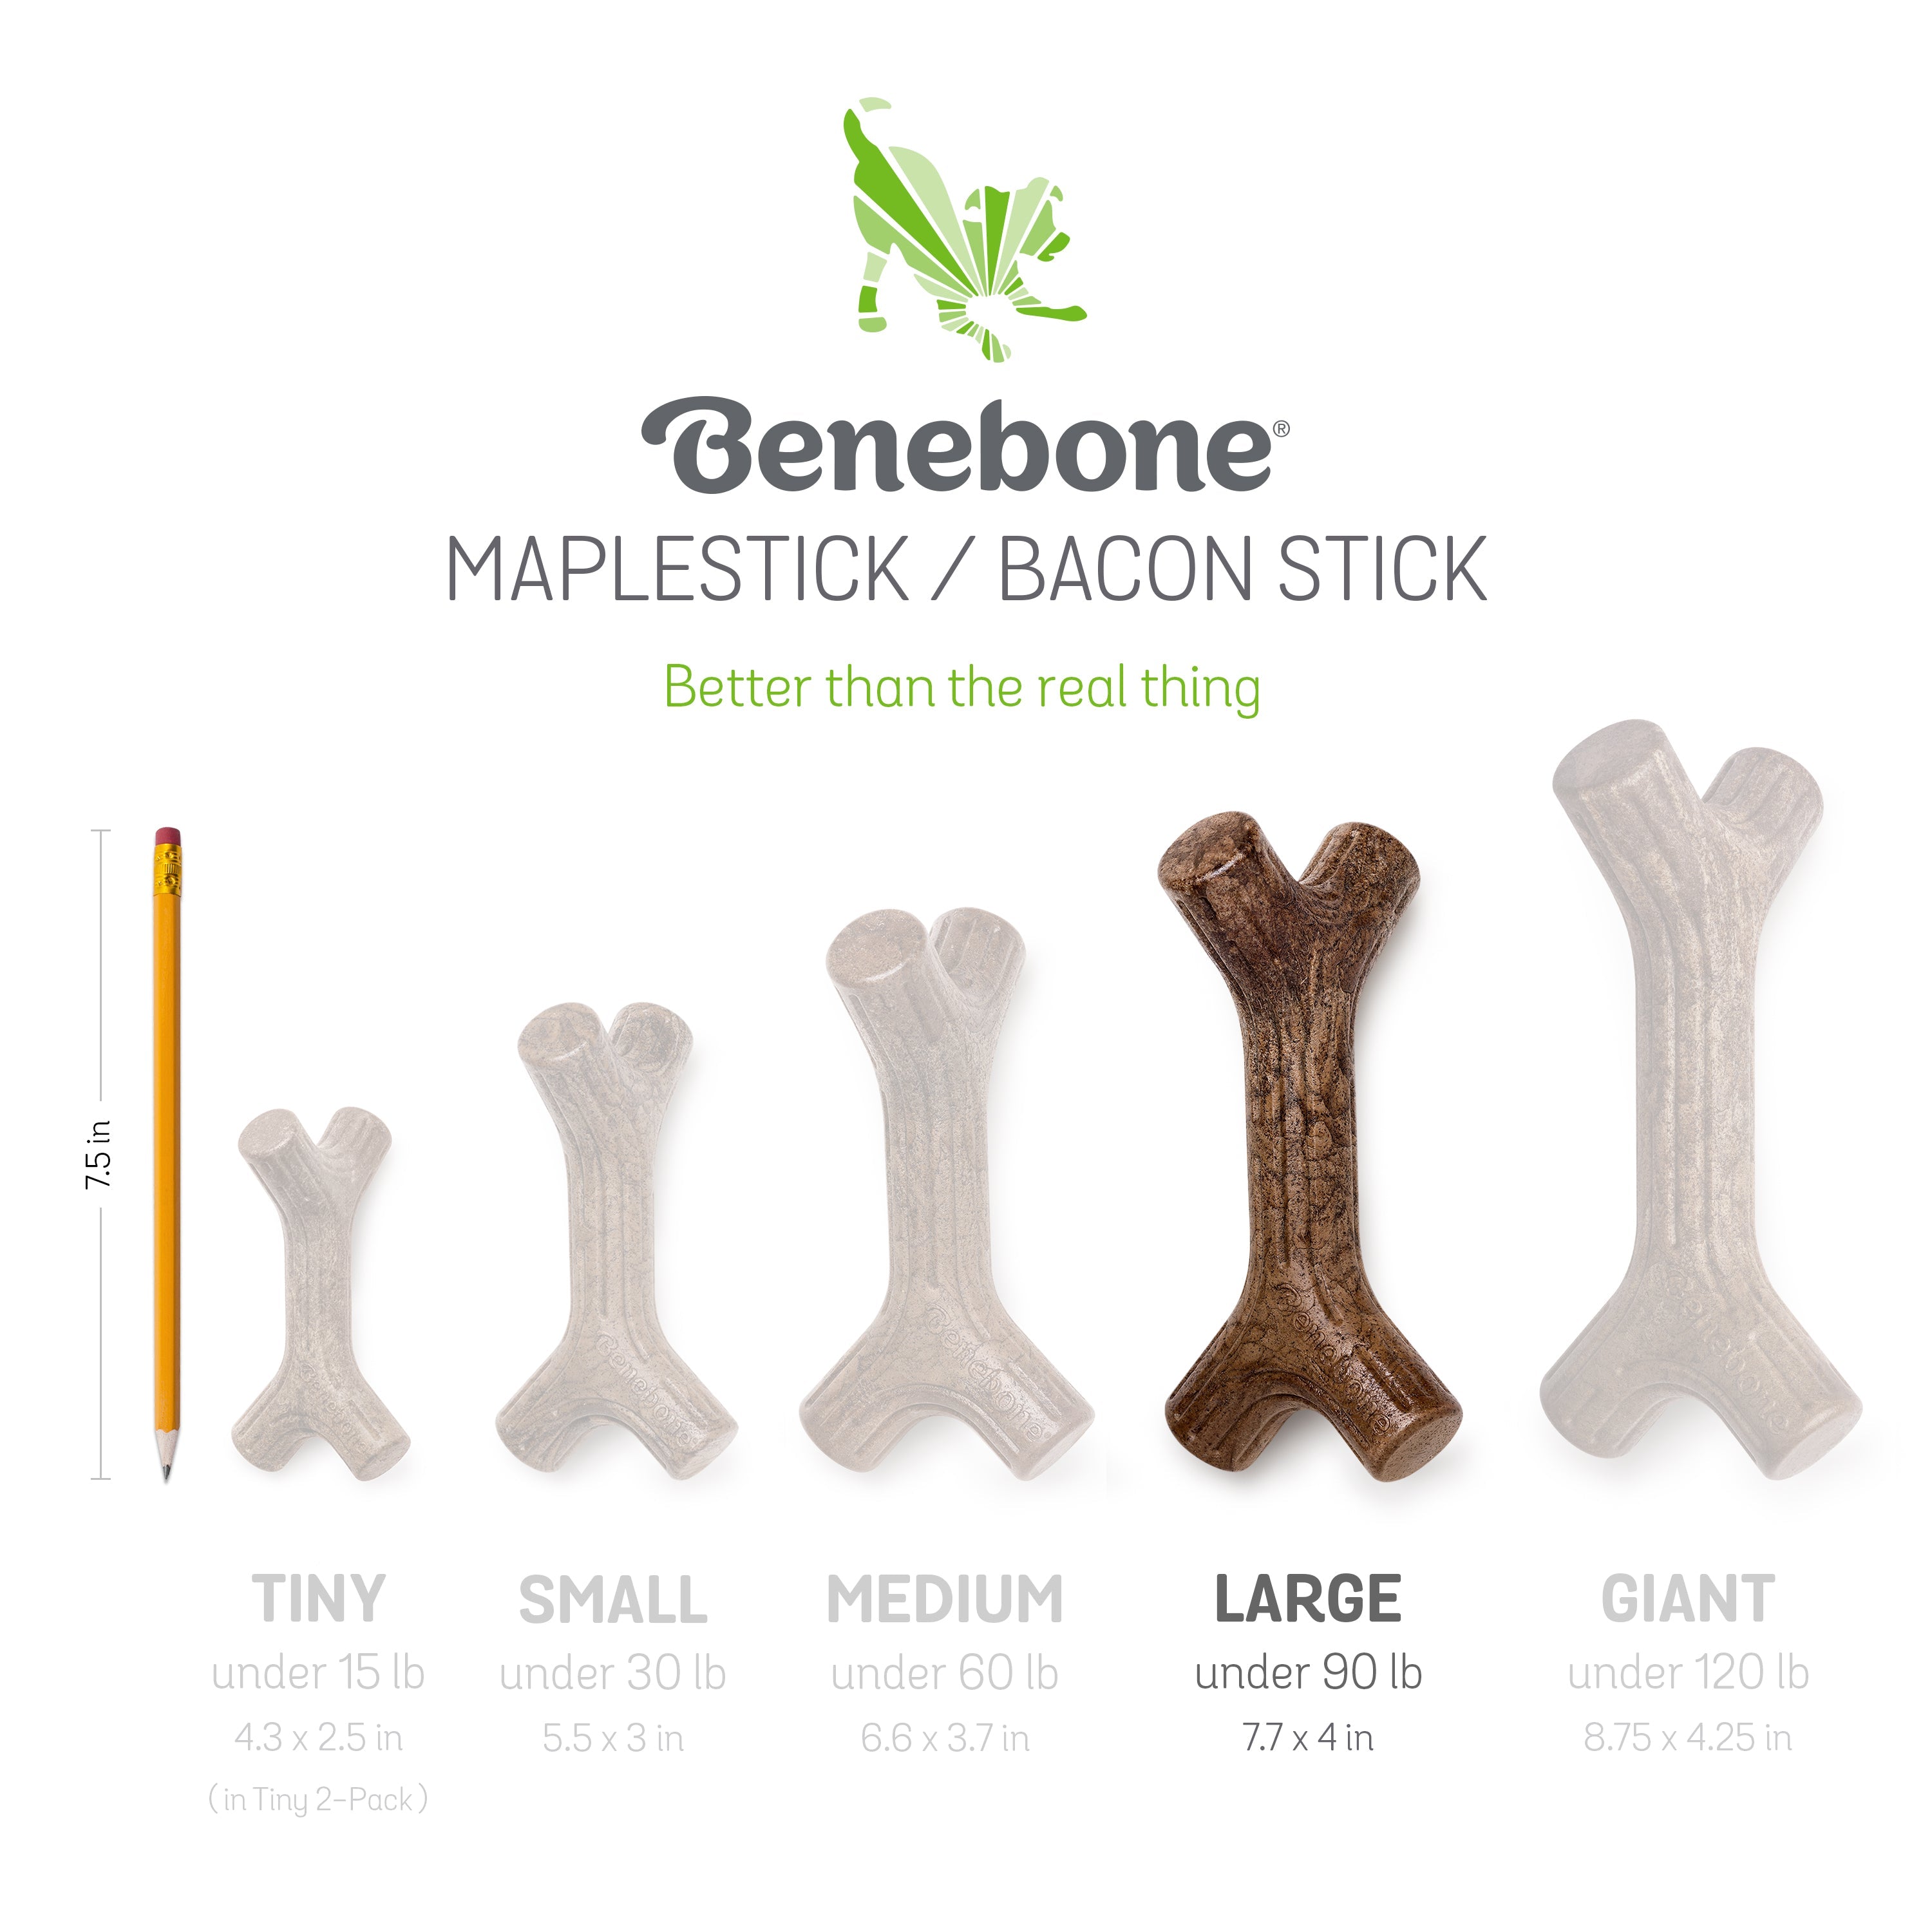 Benebone's Bacon Stick Durable Dog Chew Toy